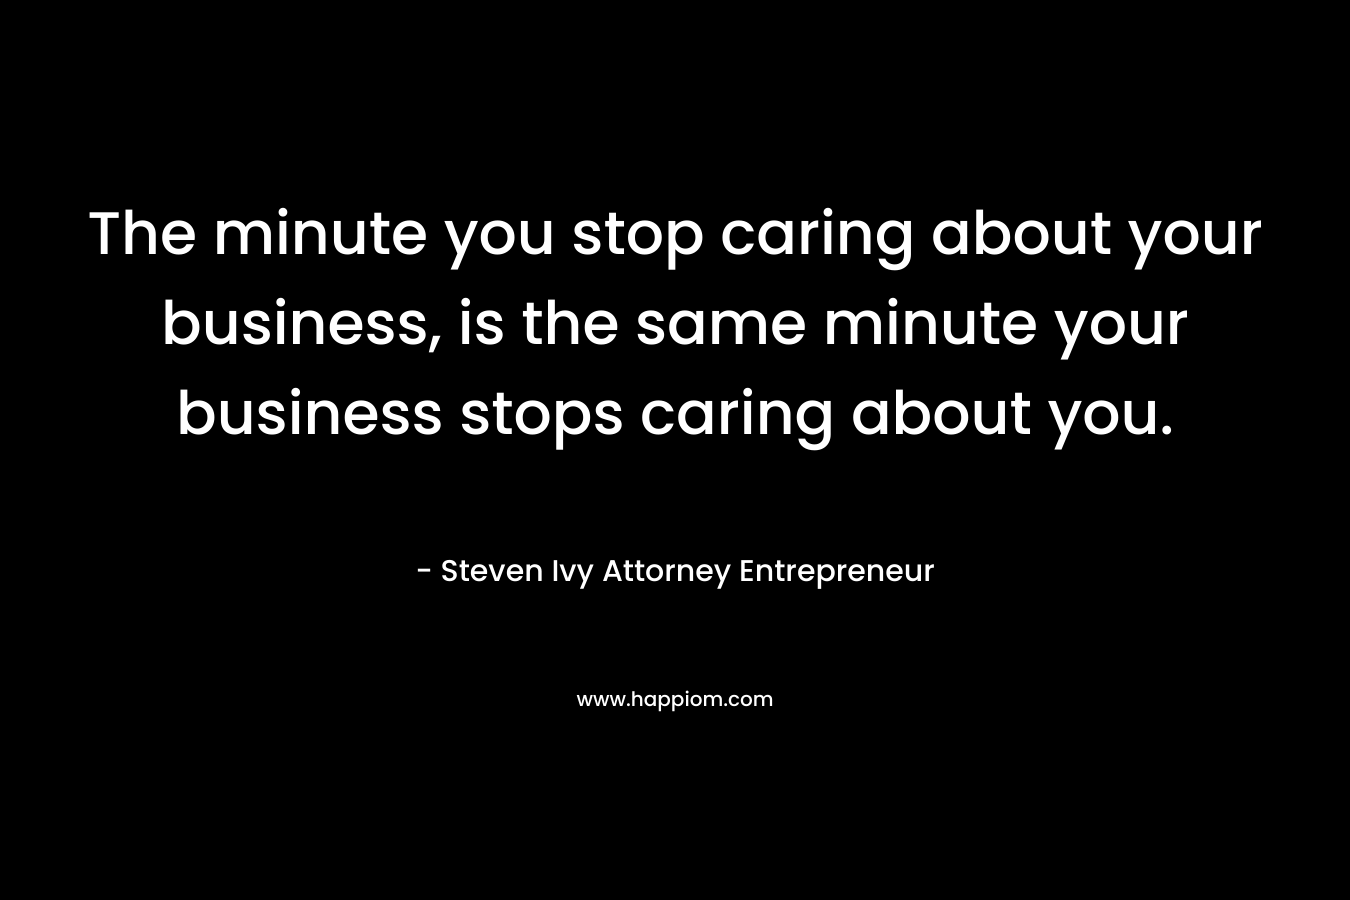 The minute you stop caring about your business, is the same minute your business stops caring about you.